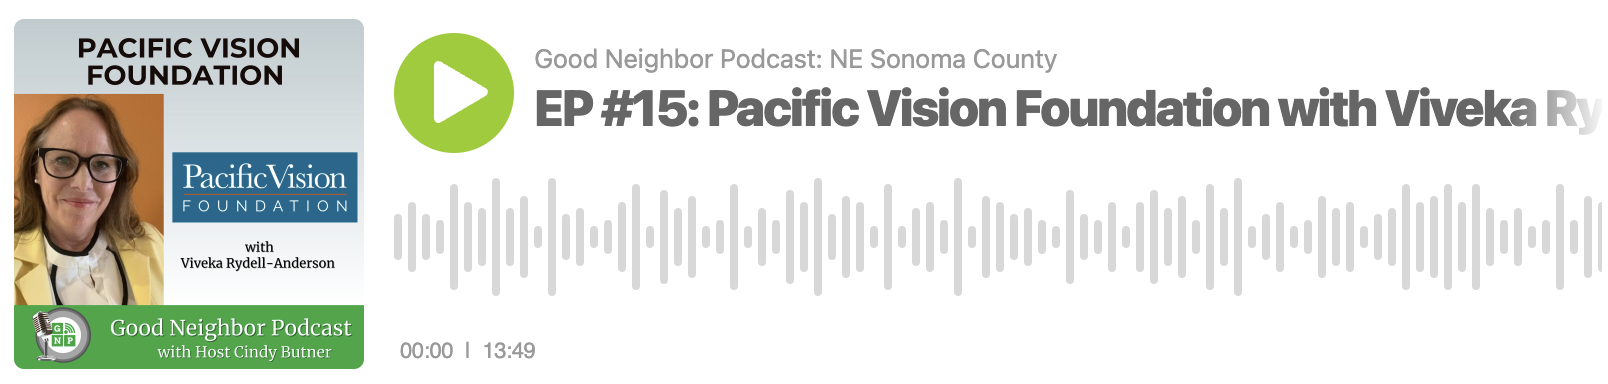 Good Neighbor Podcast Episode #15: Pacific Vision Foundation with Viveka Rydell-Anderson